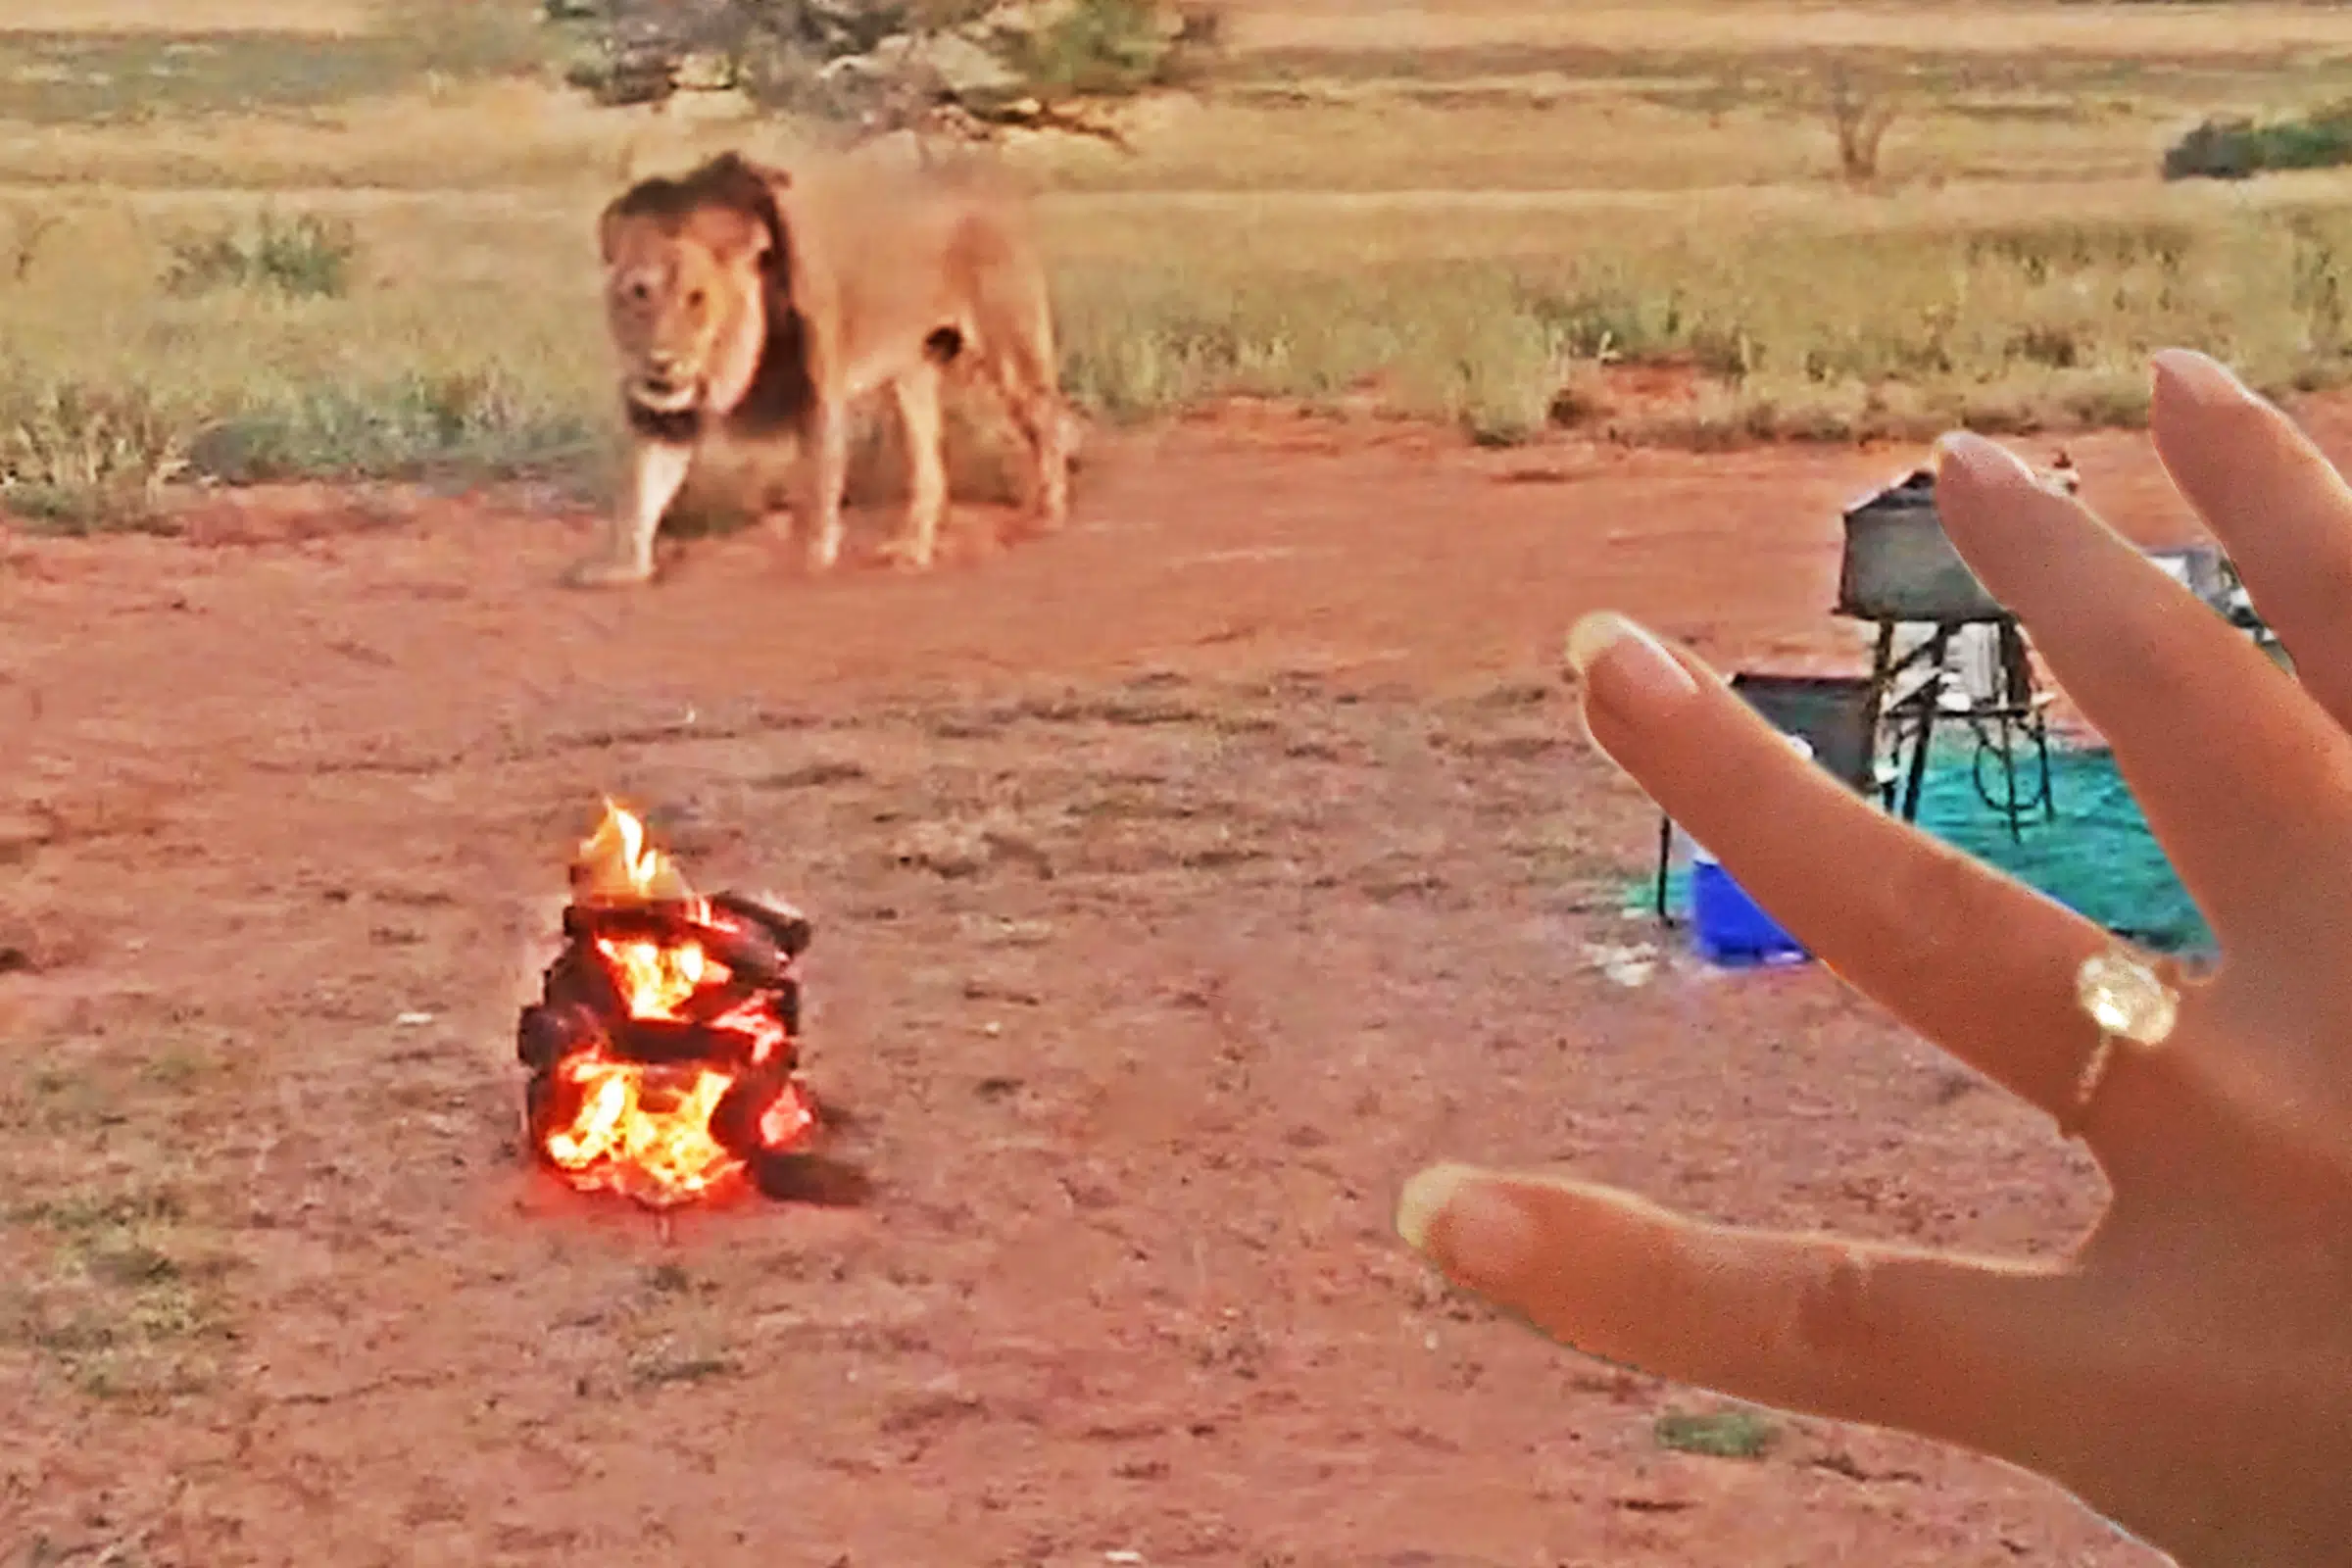 Lions Intrude on Wedding Proposal While Camping